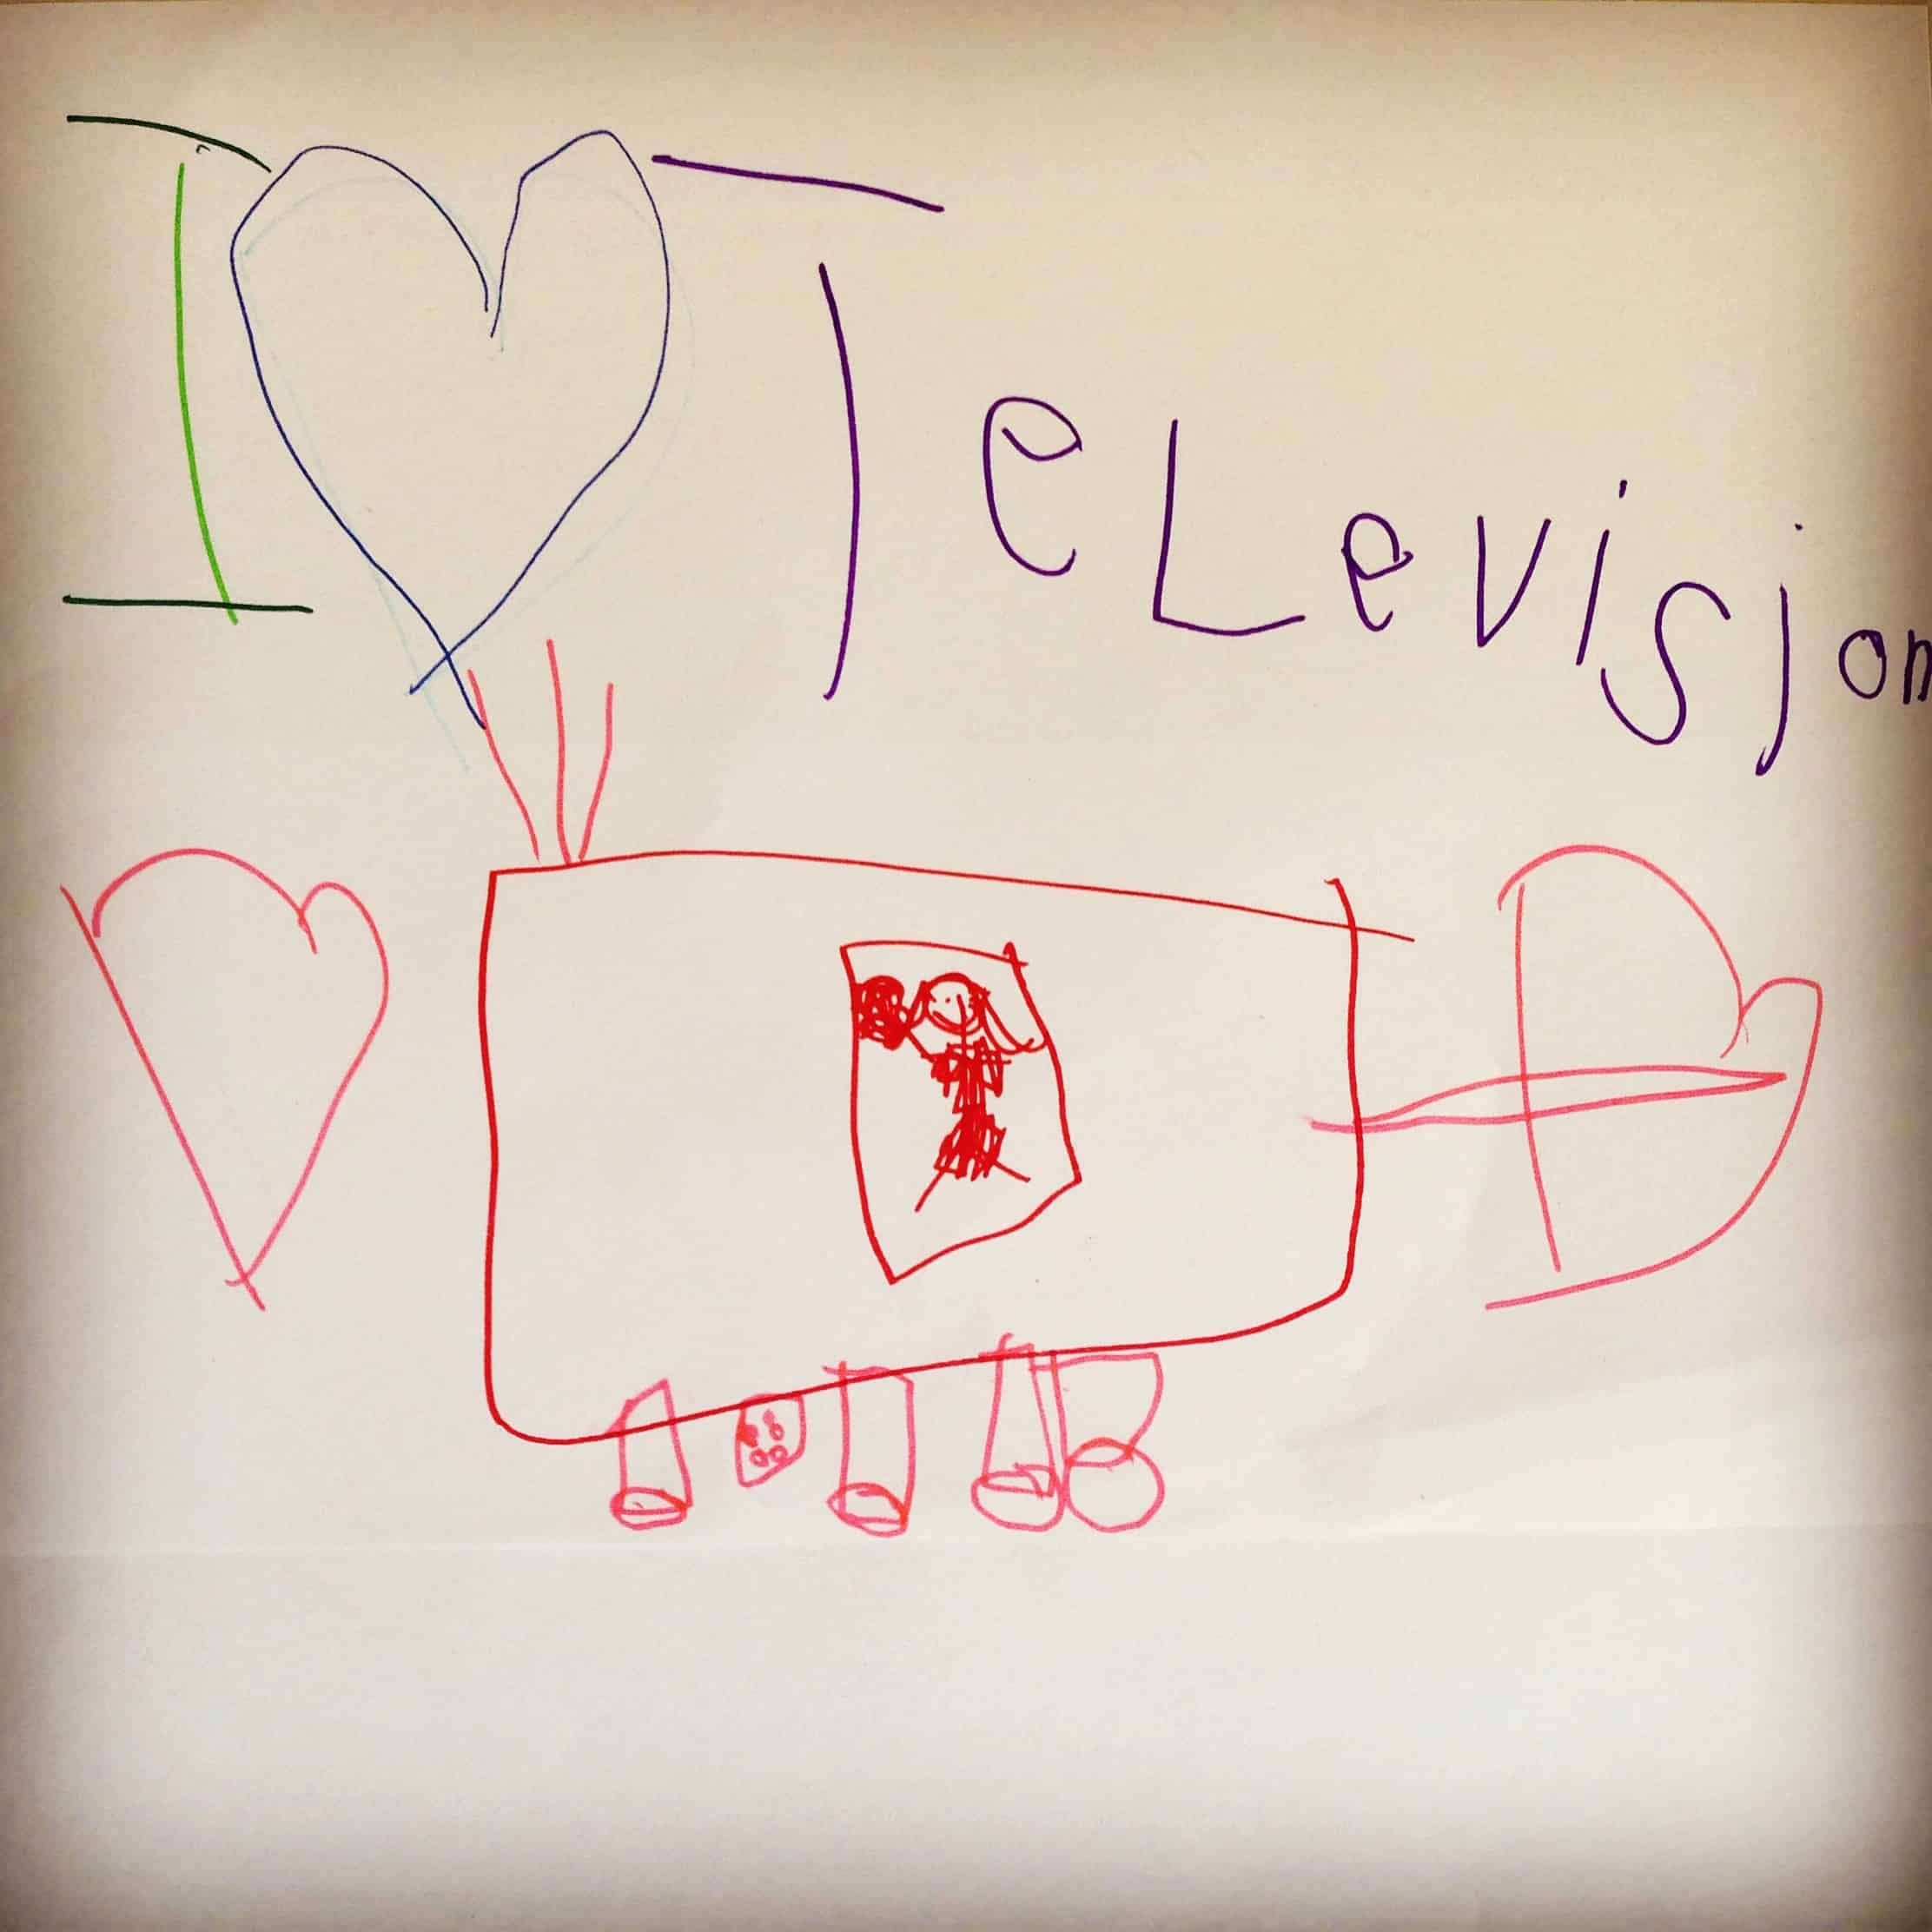 My daughter loves television: the future of advertising